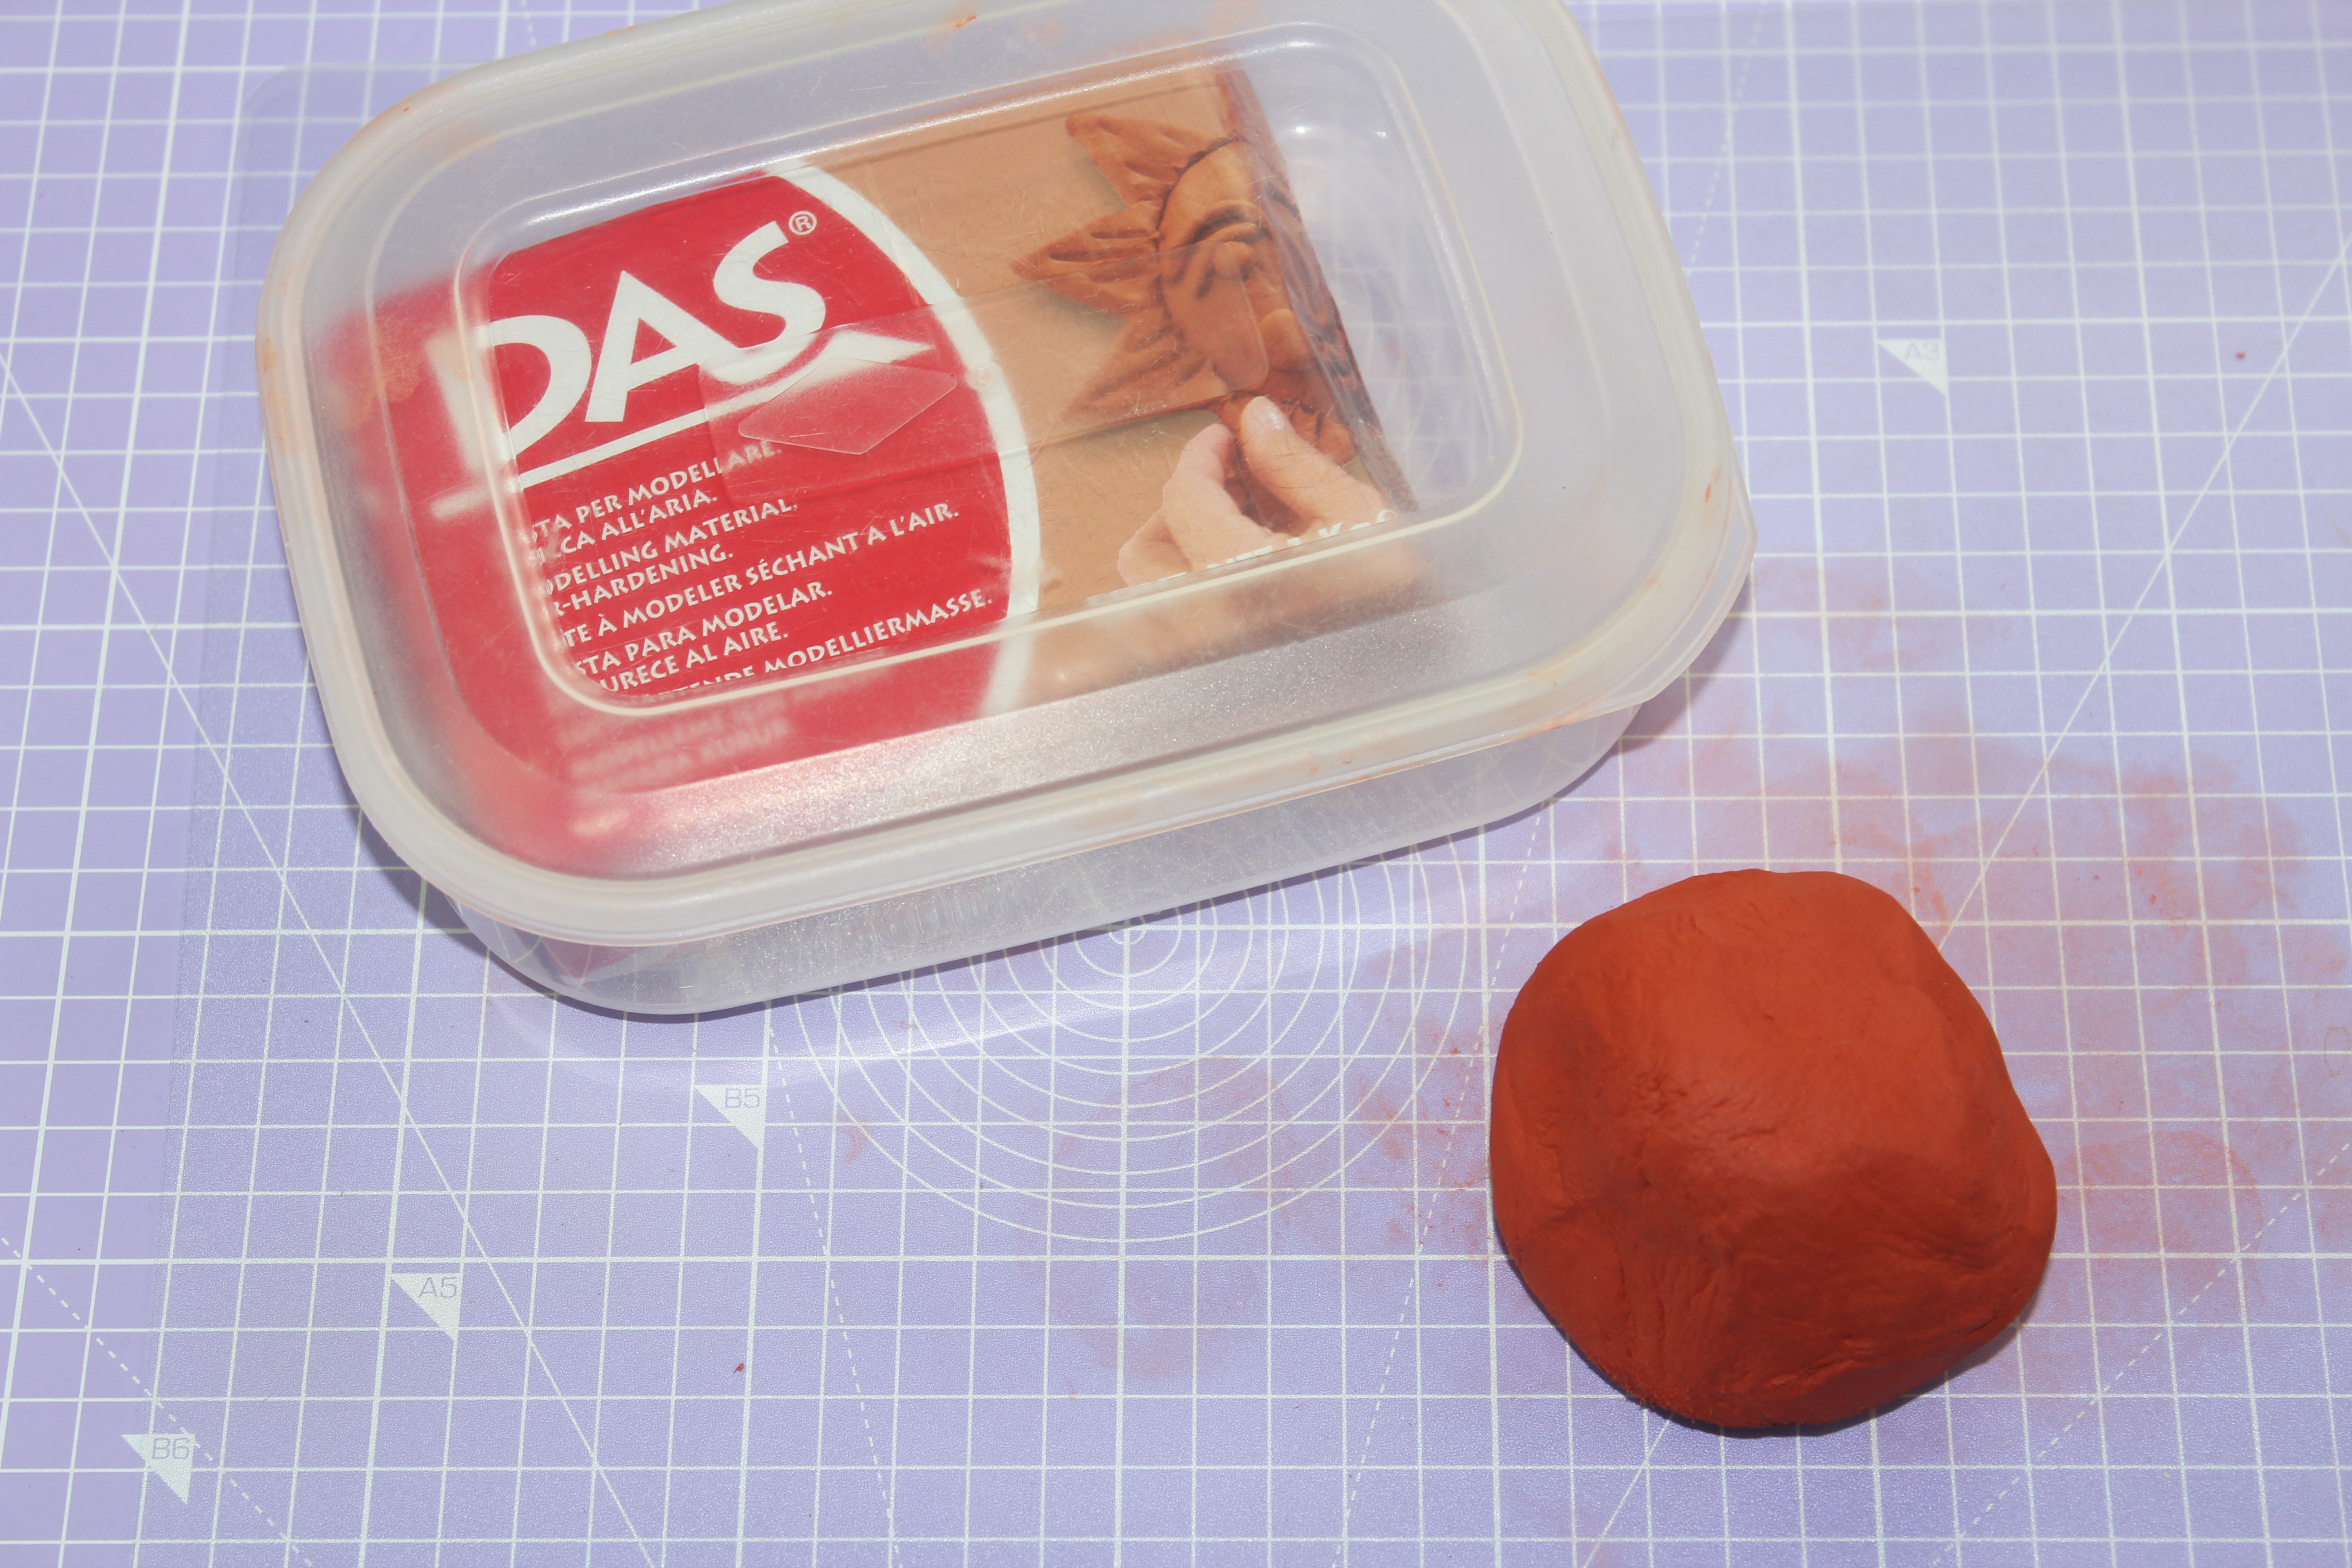 How to use air dry clay, air dry clay projects – step 1